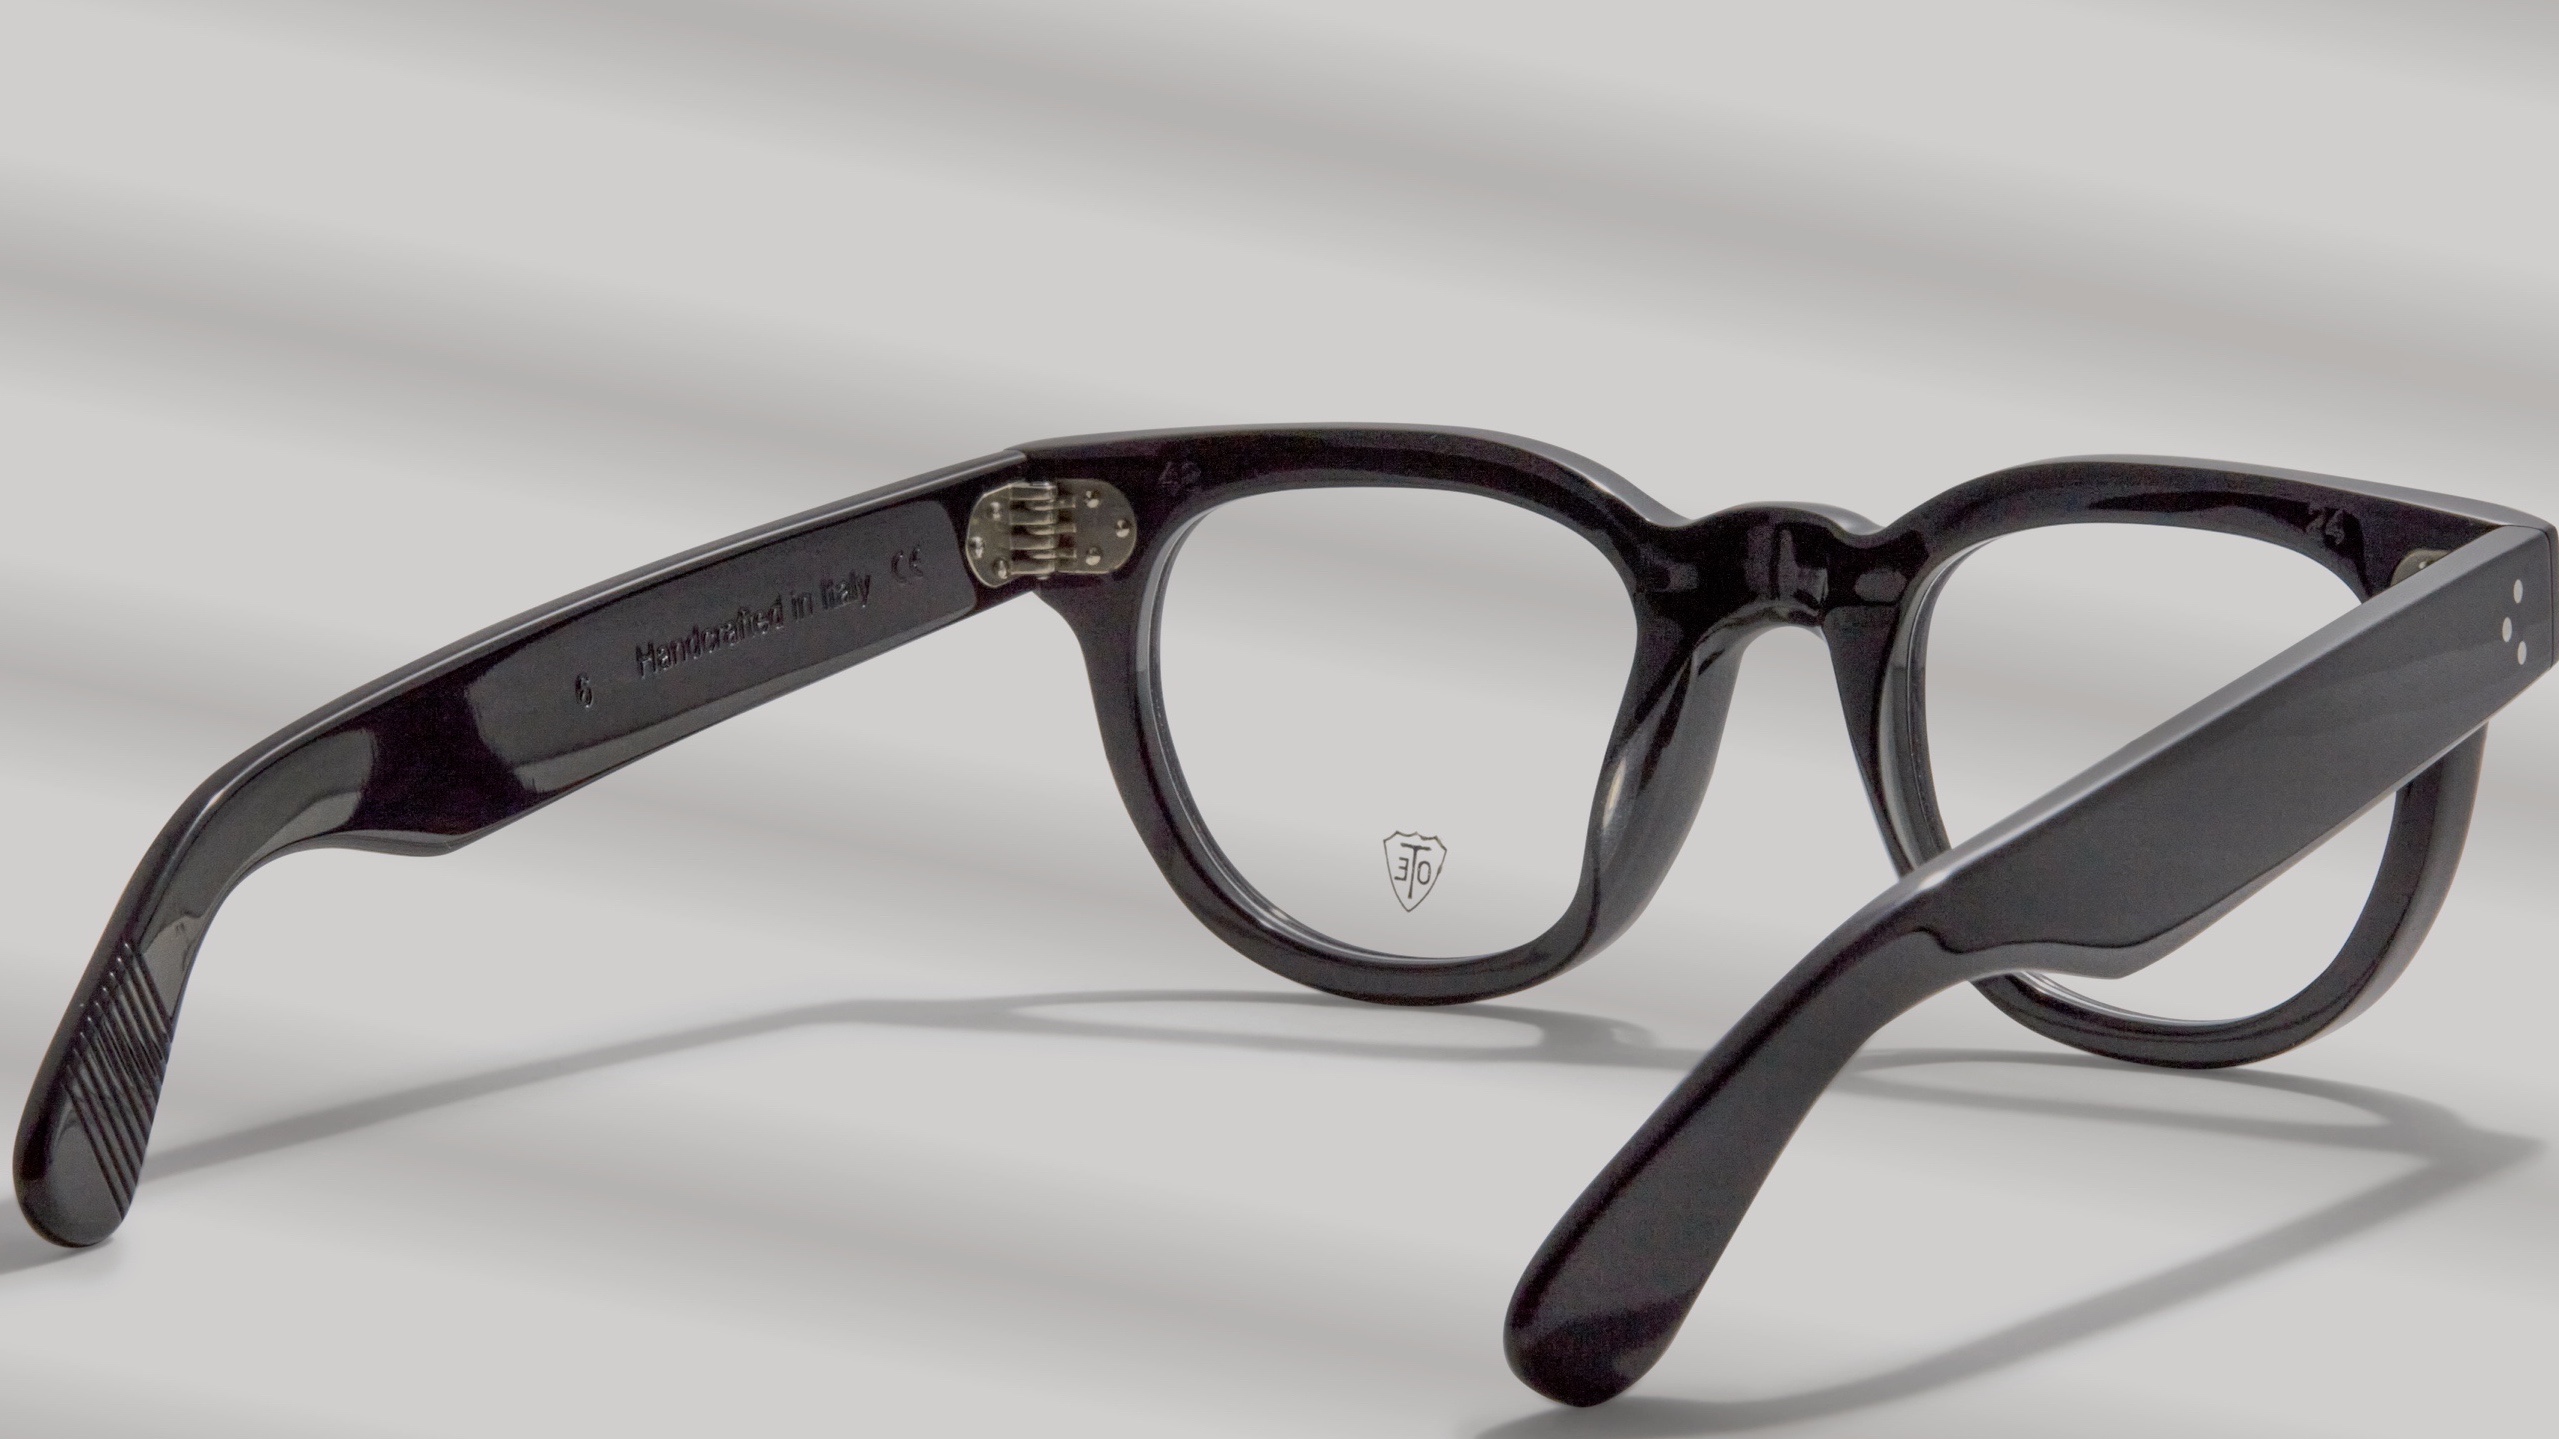 Buy Tart Optical James Dean Low-Bridge Spectacles: Virtual Try-On Available